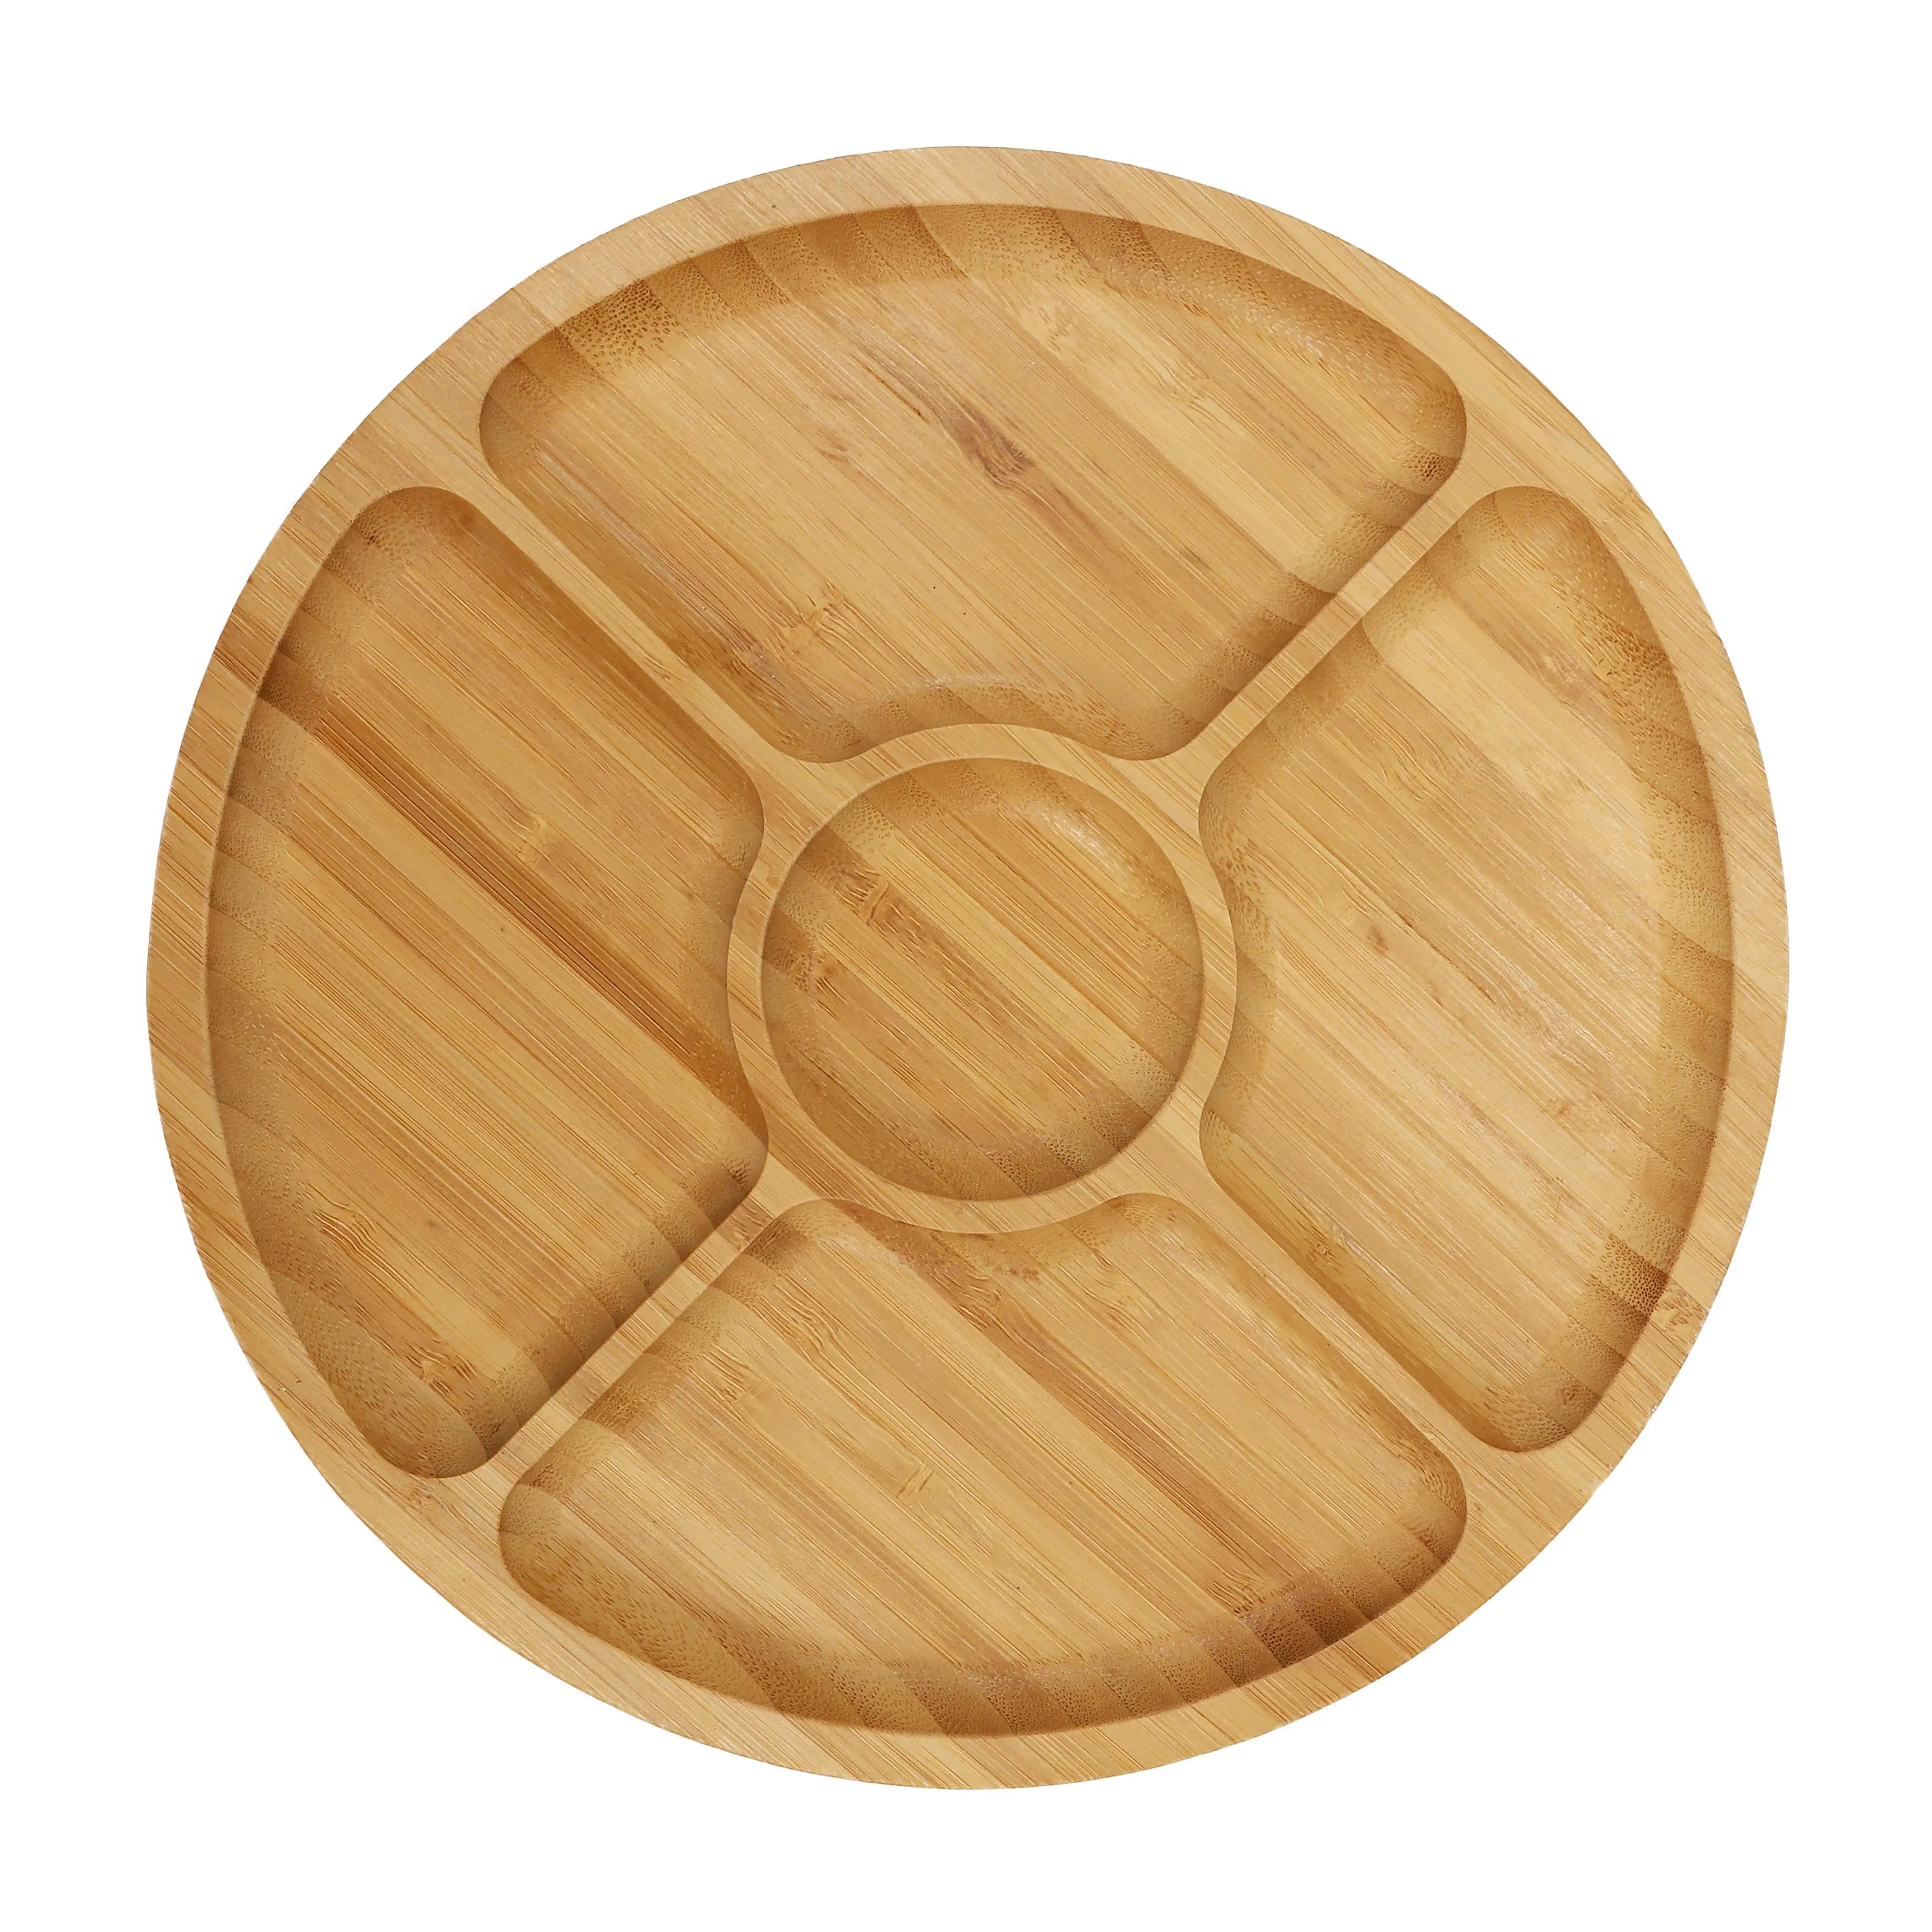 Bamboo Wooden Serving Tray Dishes Dessert Fruit Cookie Plate Board Natural for Party All-season Engraving